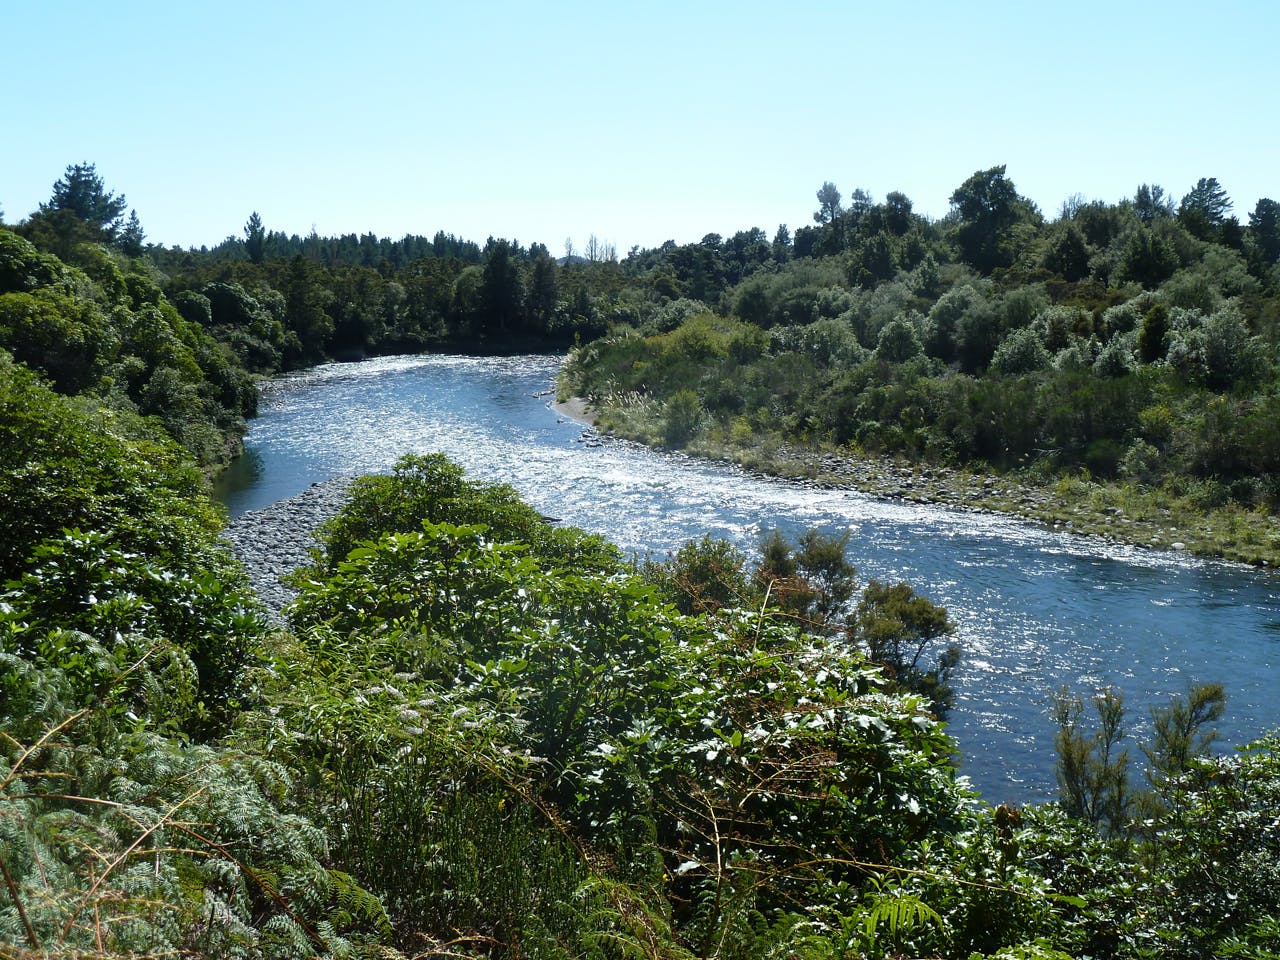 The three day walk along the Tongariro River is still years away